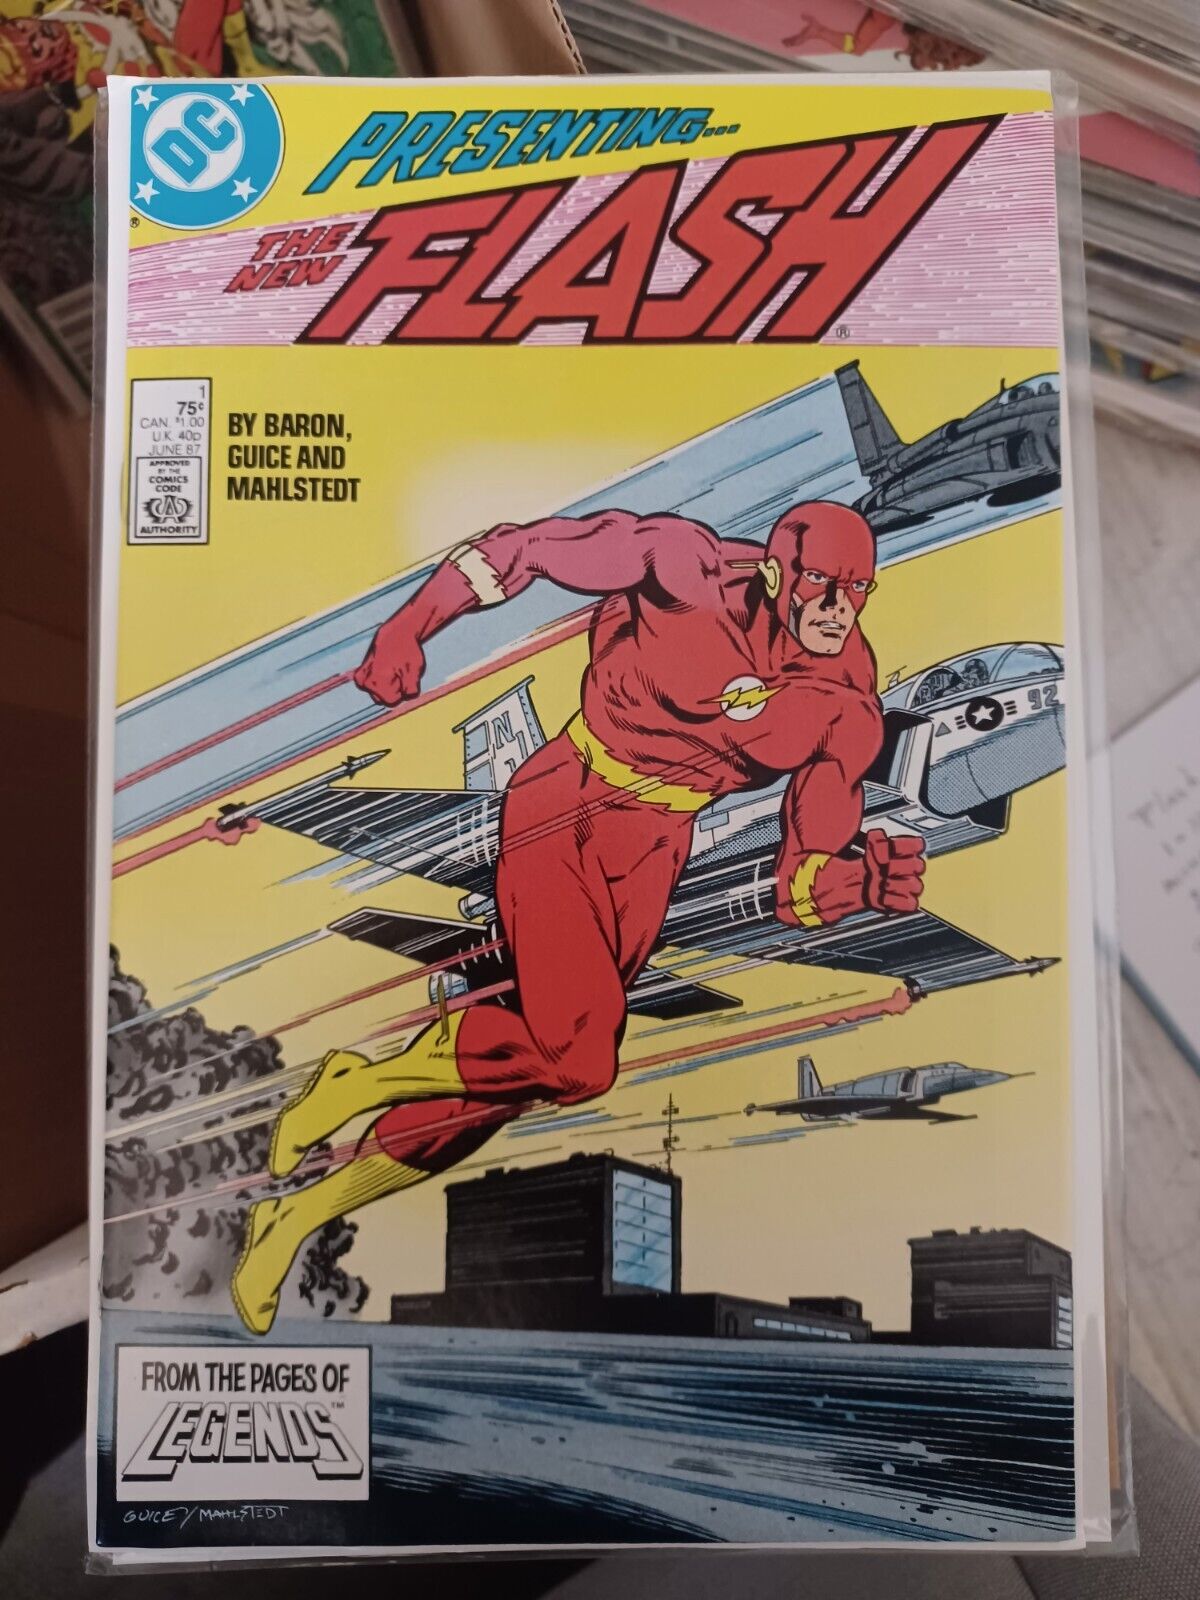 PRESENTING THE NEW FLASH # 1-105 1987 YOU PICK & CHOOSE ISSUES VERY FINE TO NM